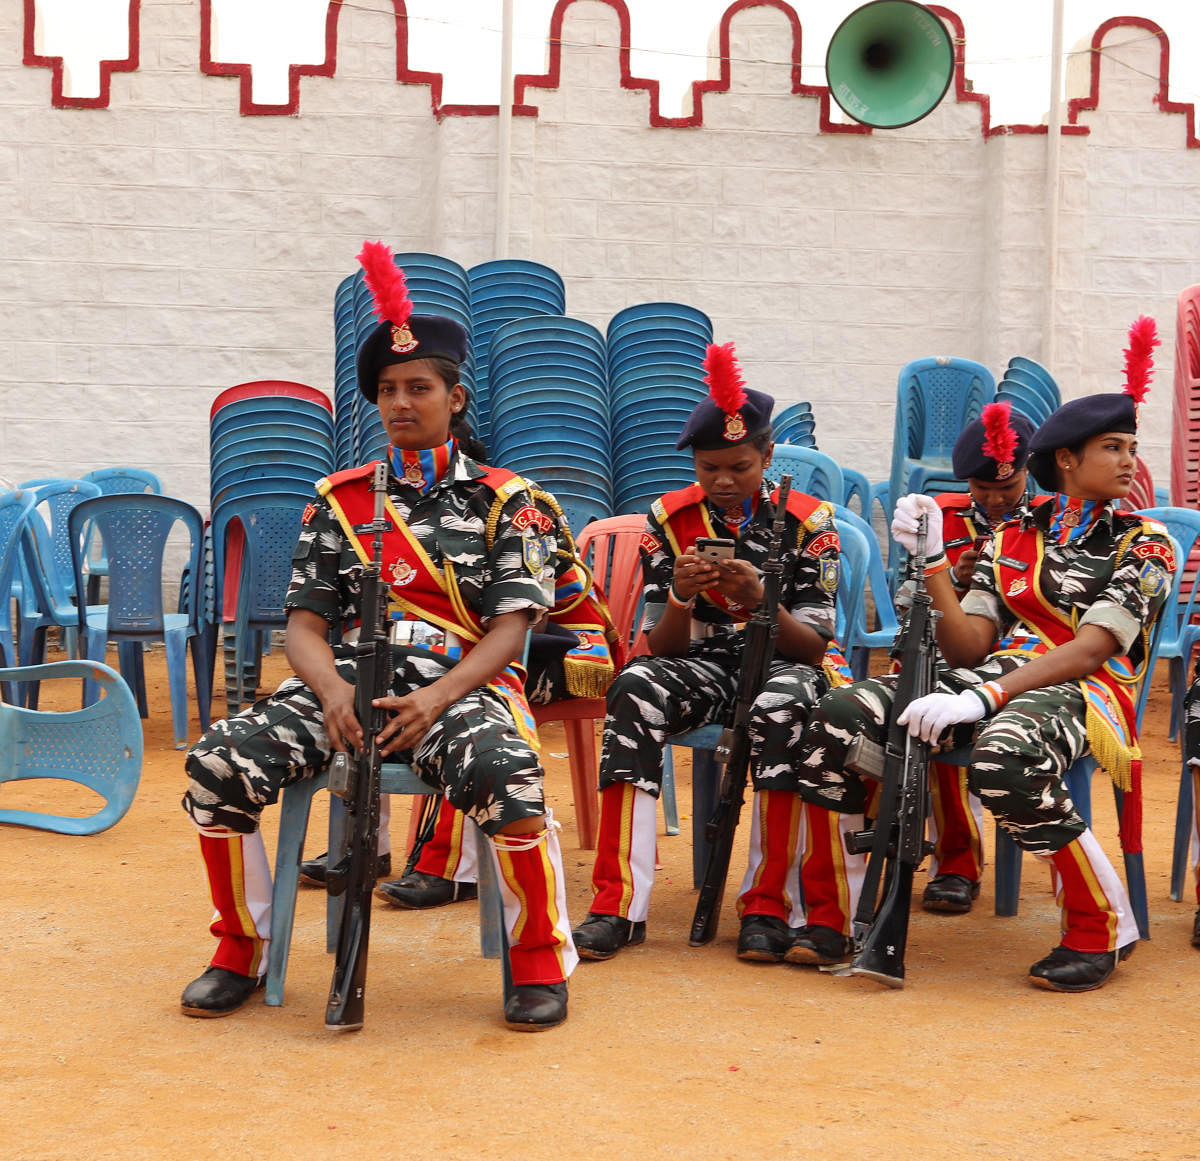 Members of the Central Police Reserve Force rest after parading during the Independence Day parade at Field Marshal Manekshaw Parade grounds in Bengaluru on August 15, 2019.